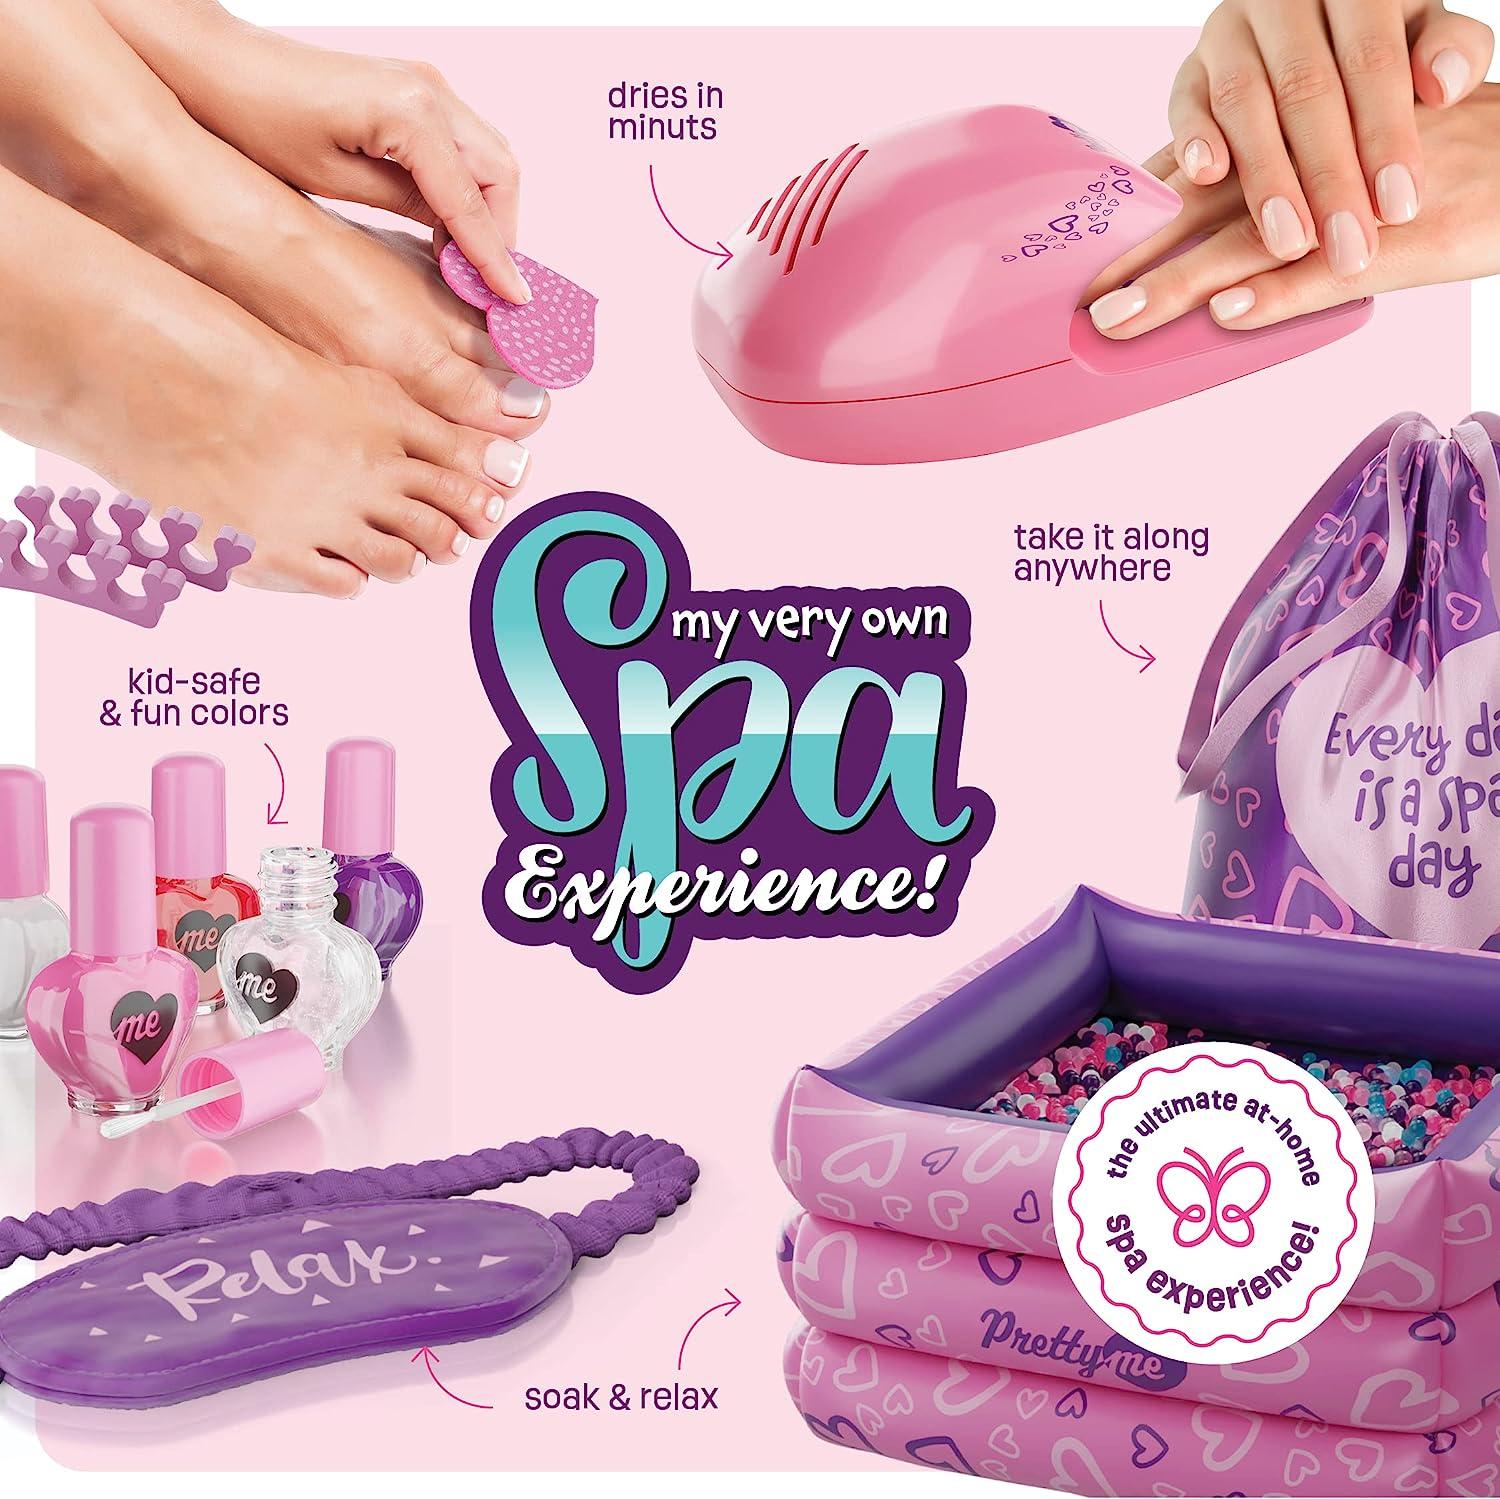 Spa Day Gift Set for Girls - Kids Manicure Pedicure Kit for Ages 6, 7, 8,  9, 10-12 Year Old Girl Gifts - Nail Art Salon + Sensory Beads Foot Spa +  Accessories Kit - Self Care Toys Age 5-12